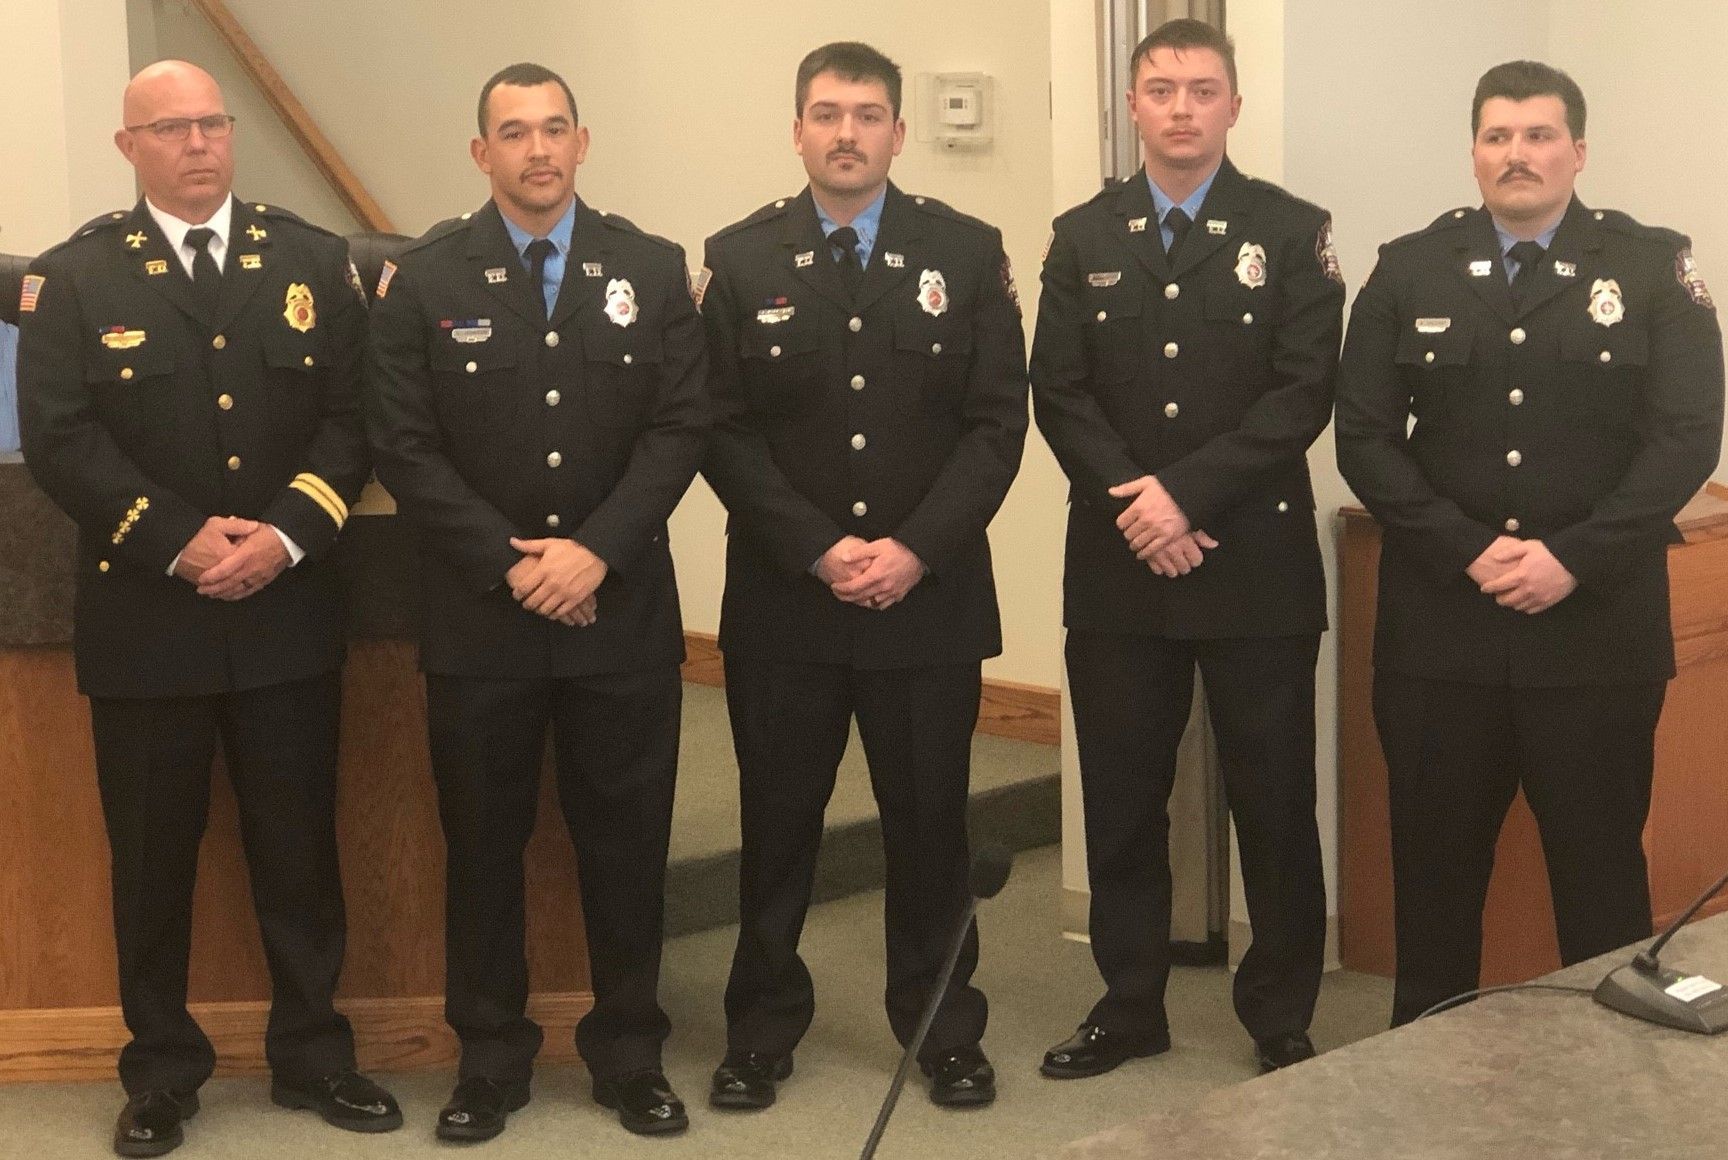 Members of the Dickson Fire Department who were presented with the Medal of Valor